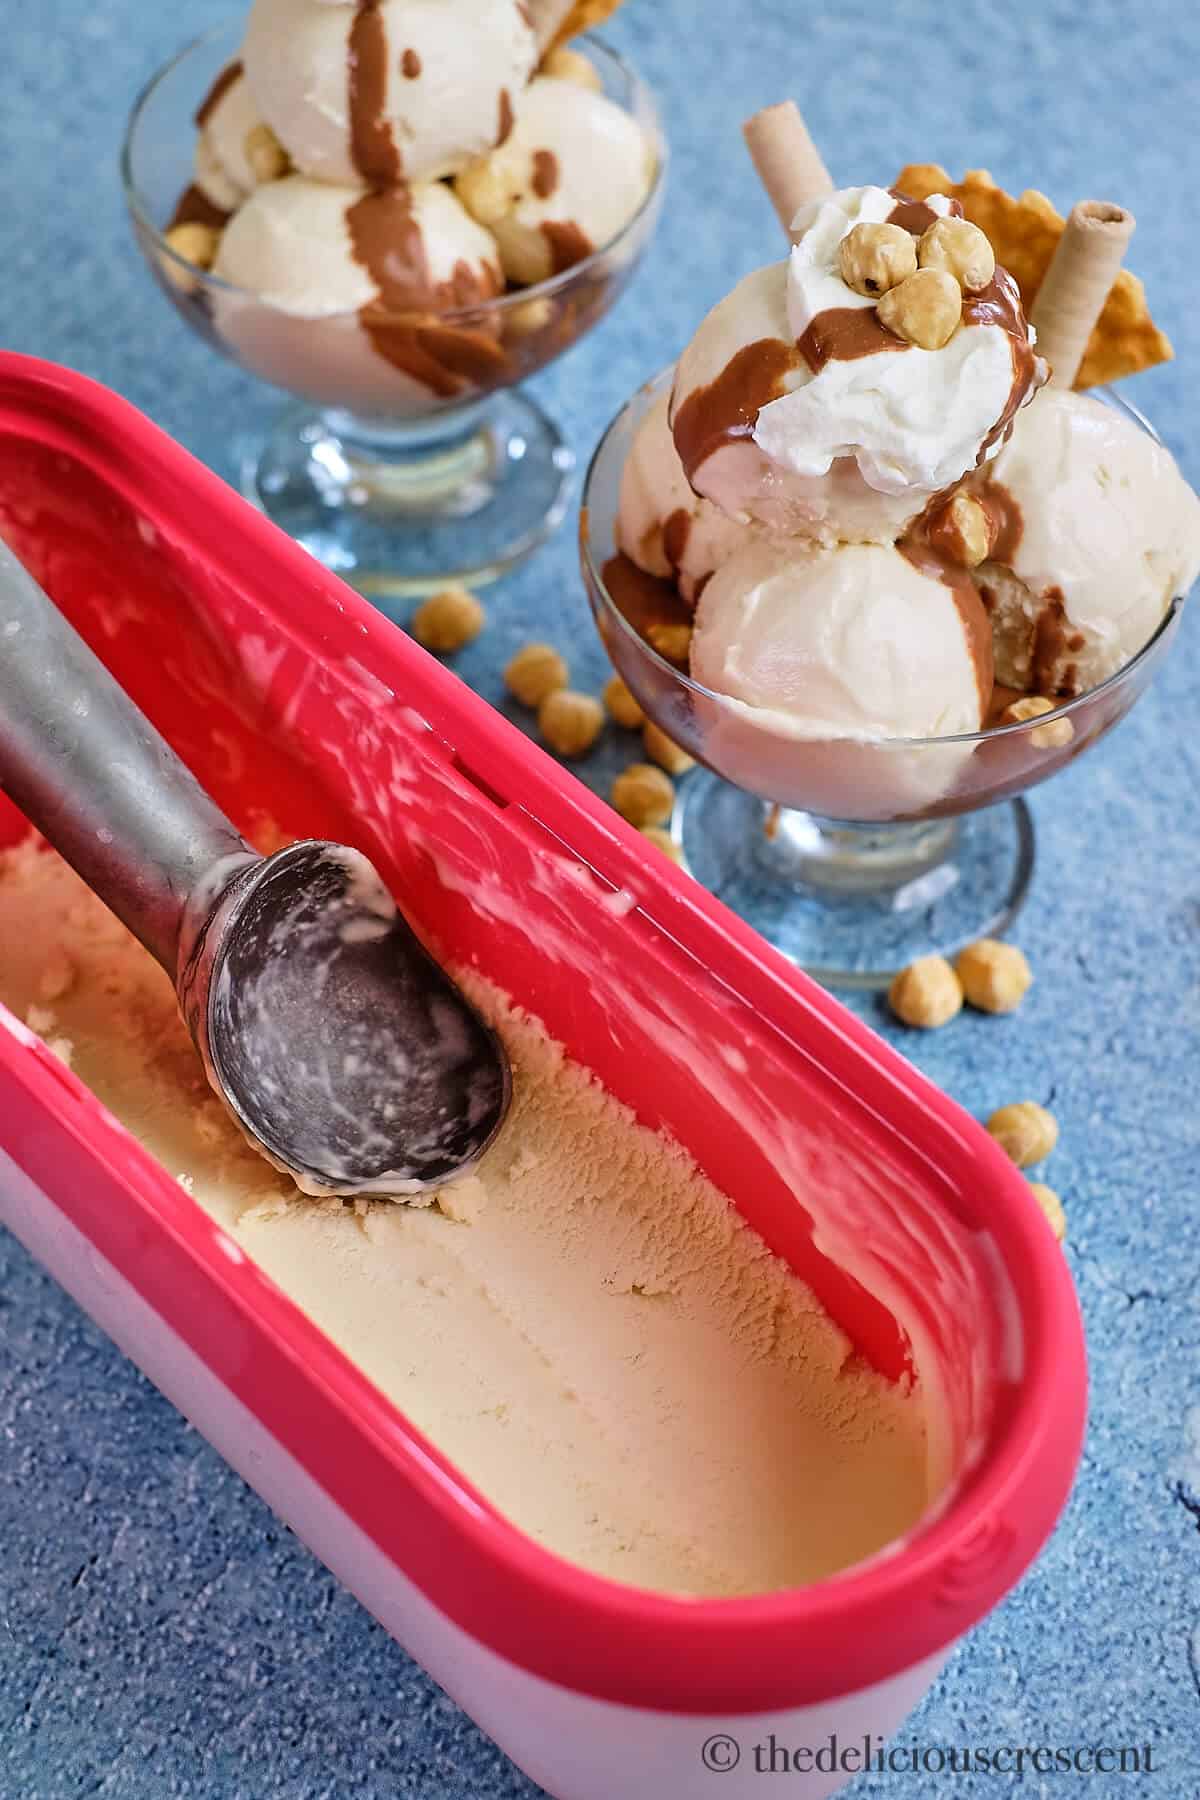 Two glass bowls full of Italian style ice cream with toppings.